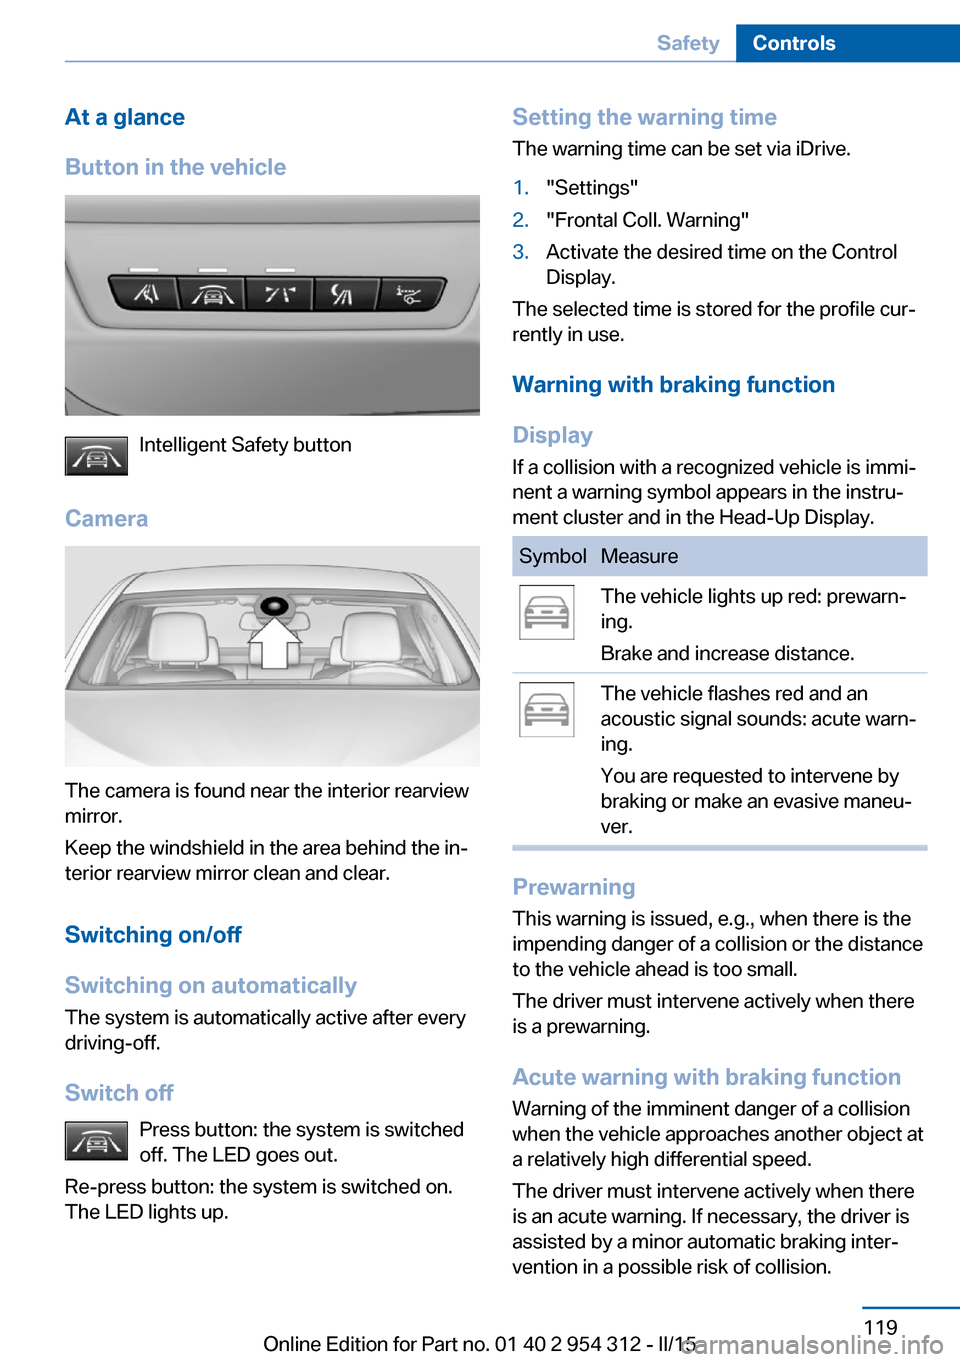 BMW 5 SERIES 2015 F10 Service Manual At a glance
Button in the vehicle
Intelligent Safety button
Camera
The camera is found near the interior rearview
mirror.
Keep the windshield in the area behind the in‐
terior rearview mirror clean 